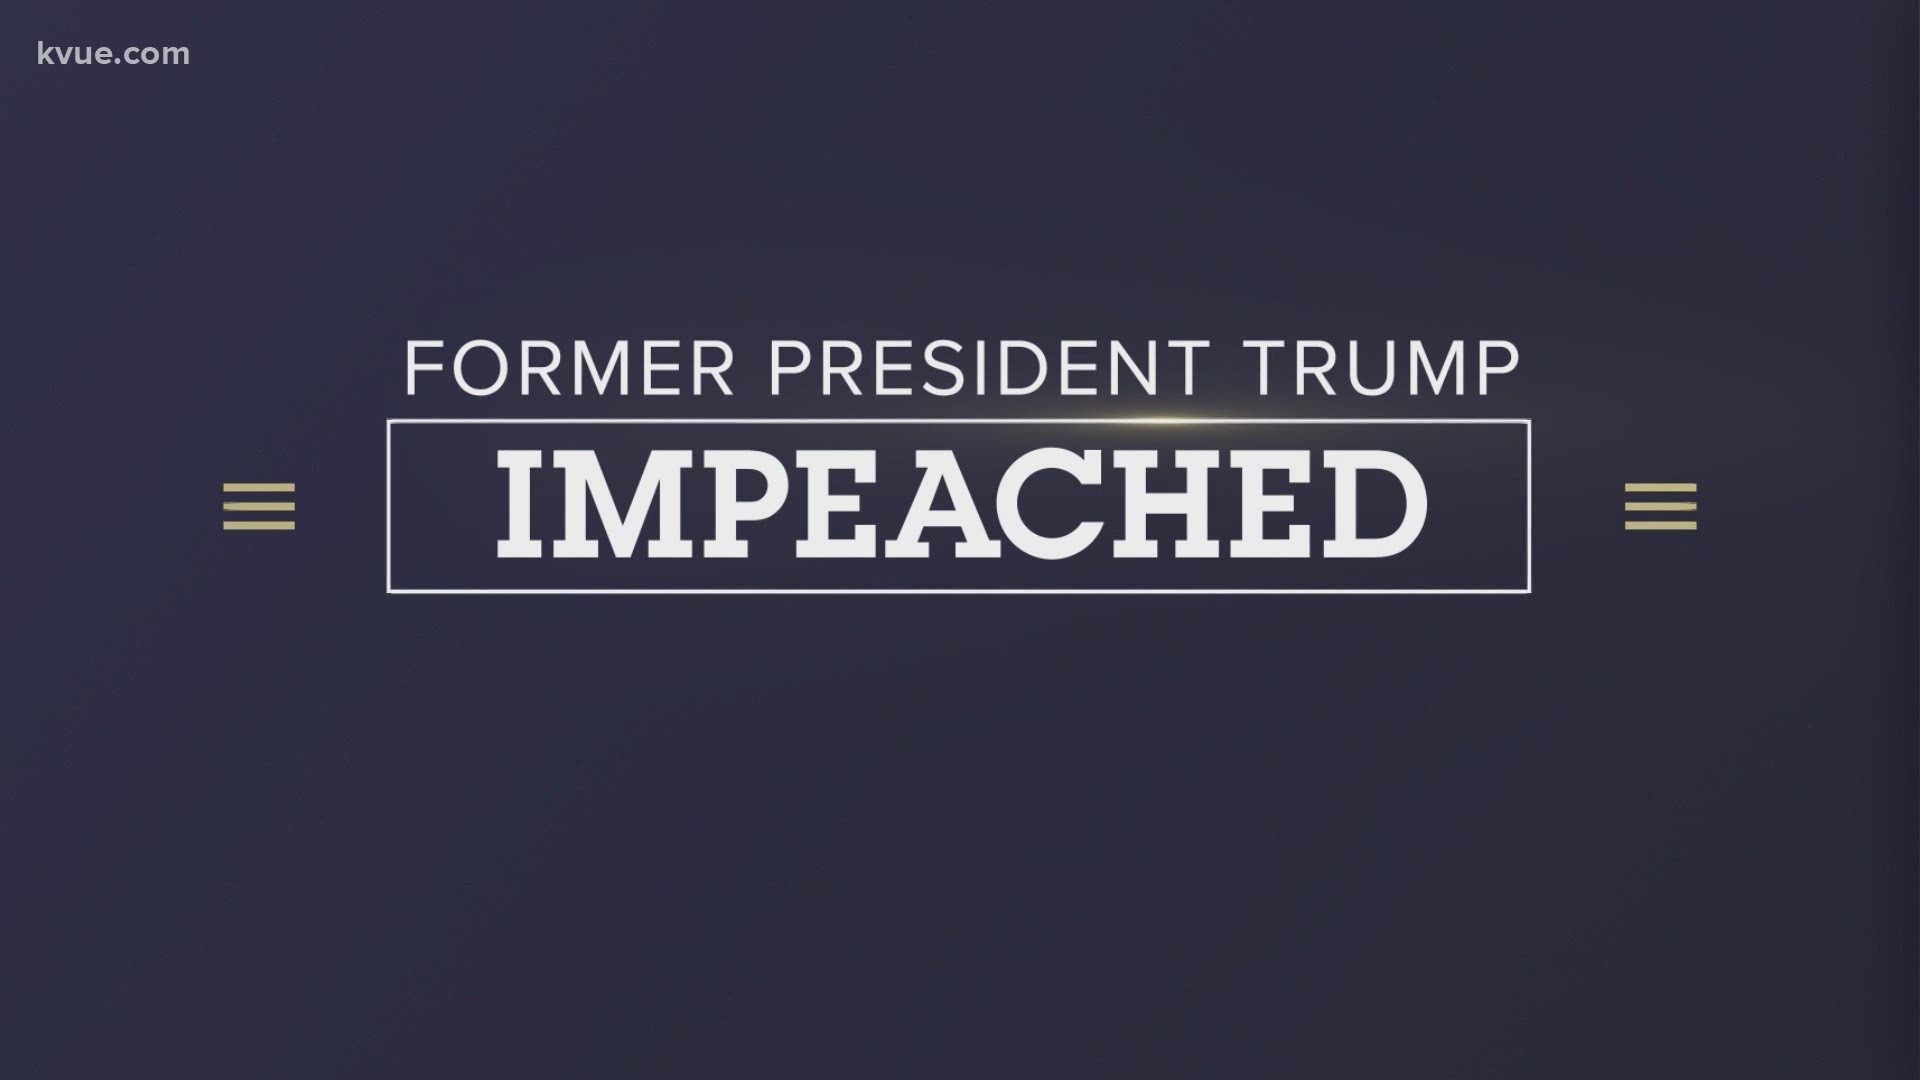 House Democrats delivered their article of impeachment to the Senate to charge former President Donald Trump with "incitement of insurrection."